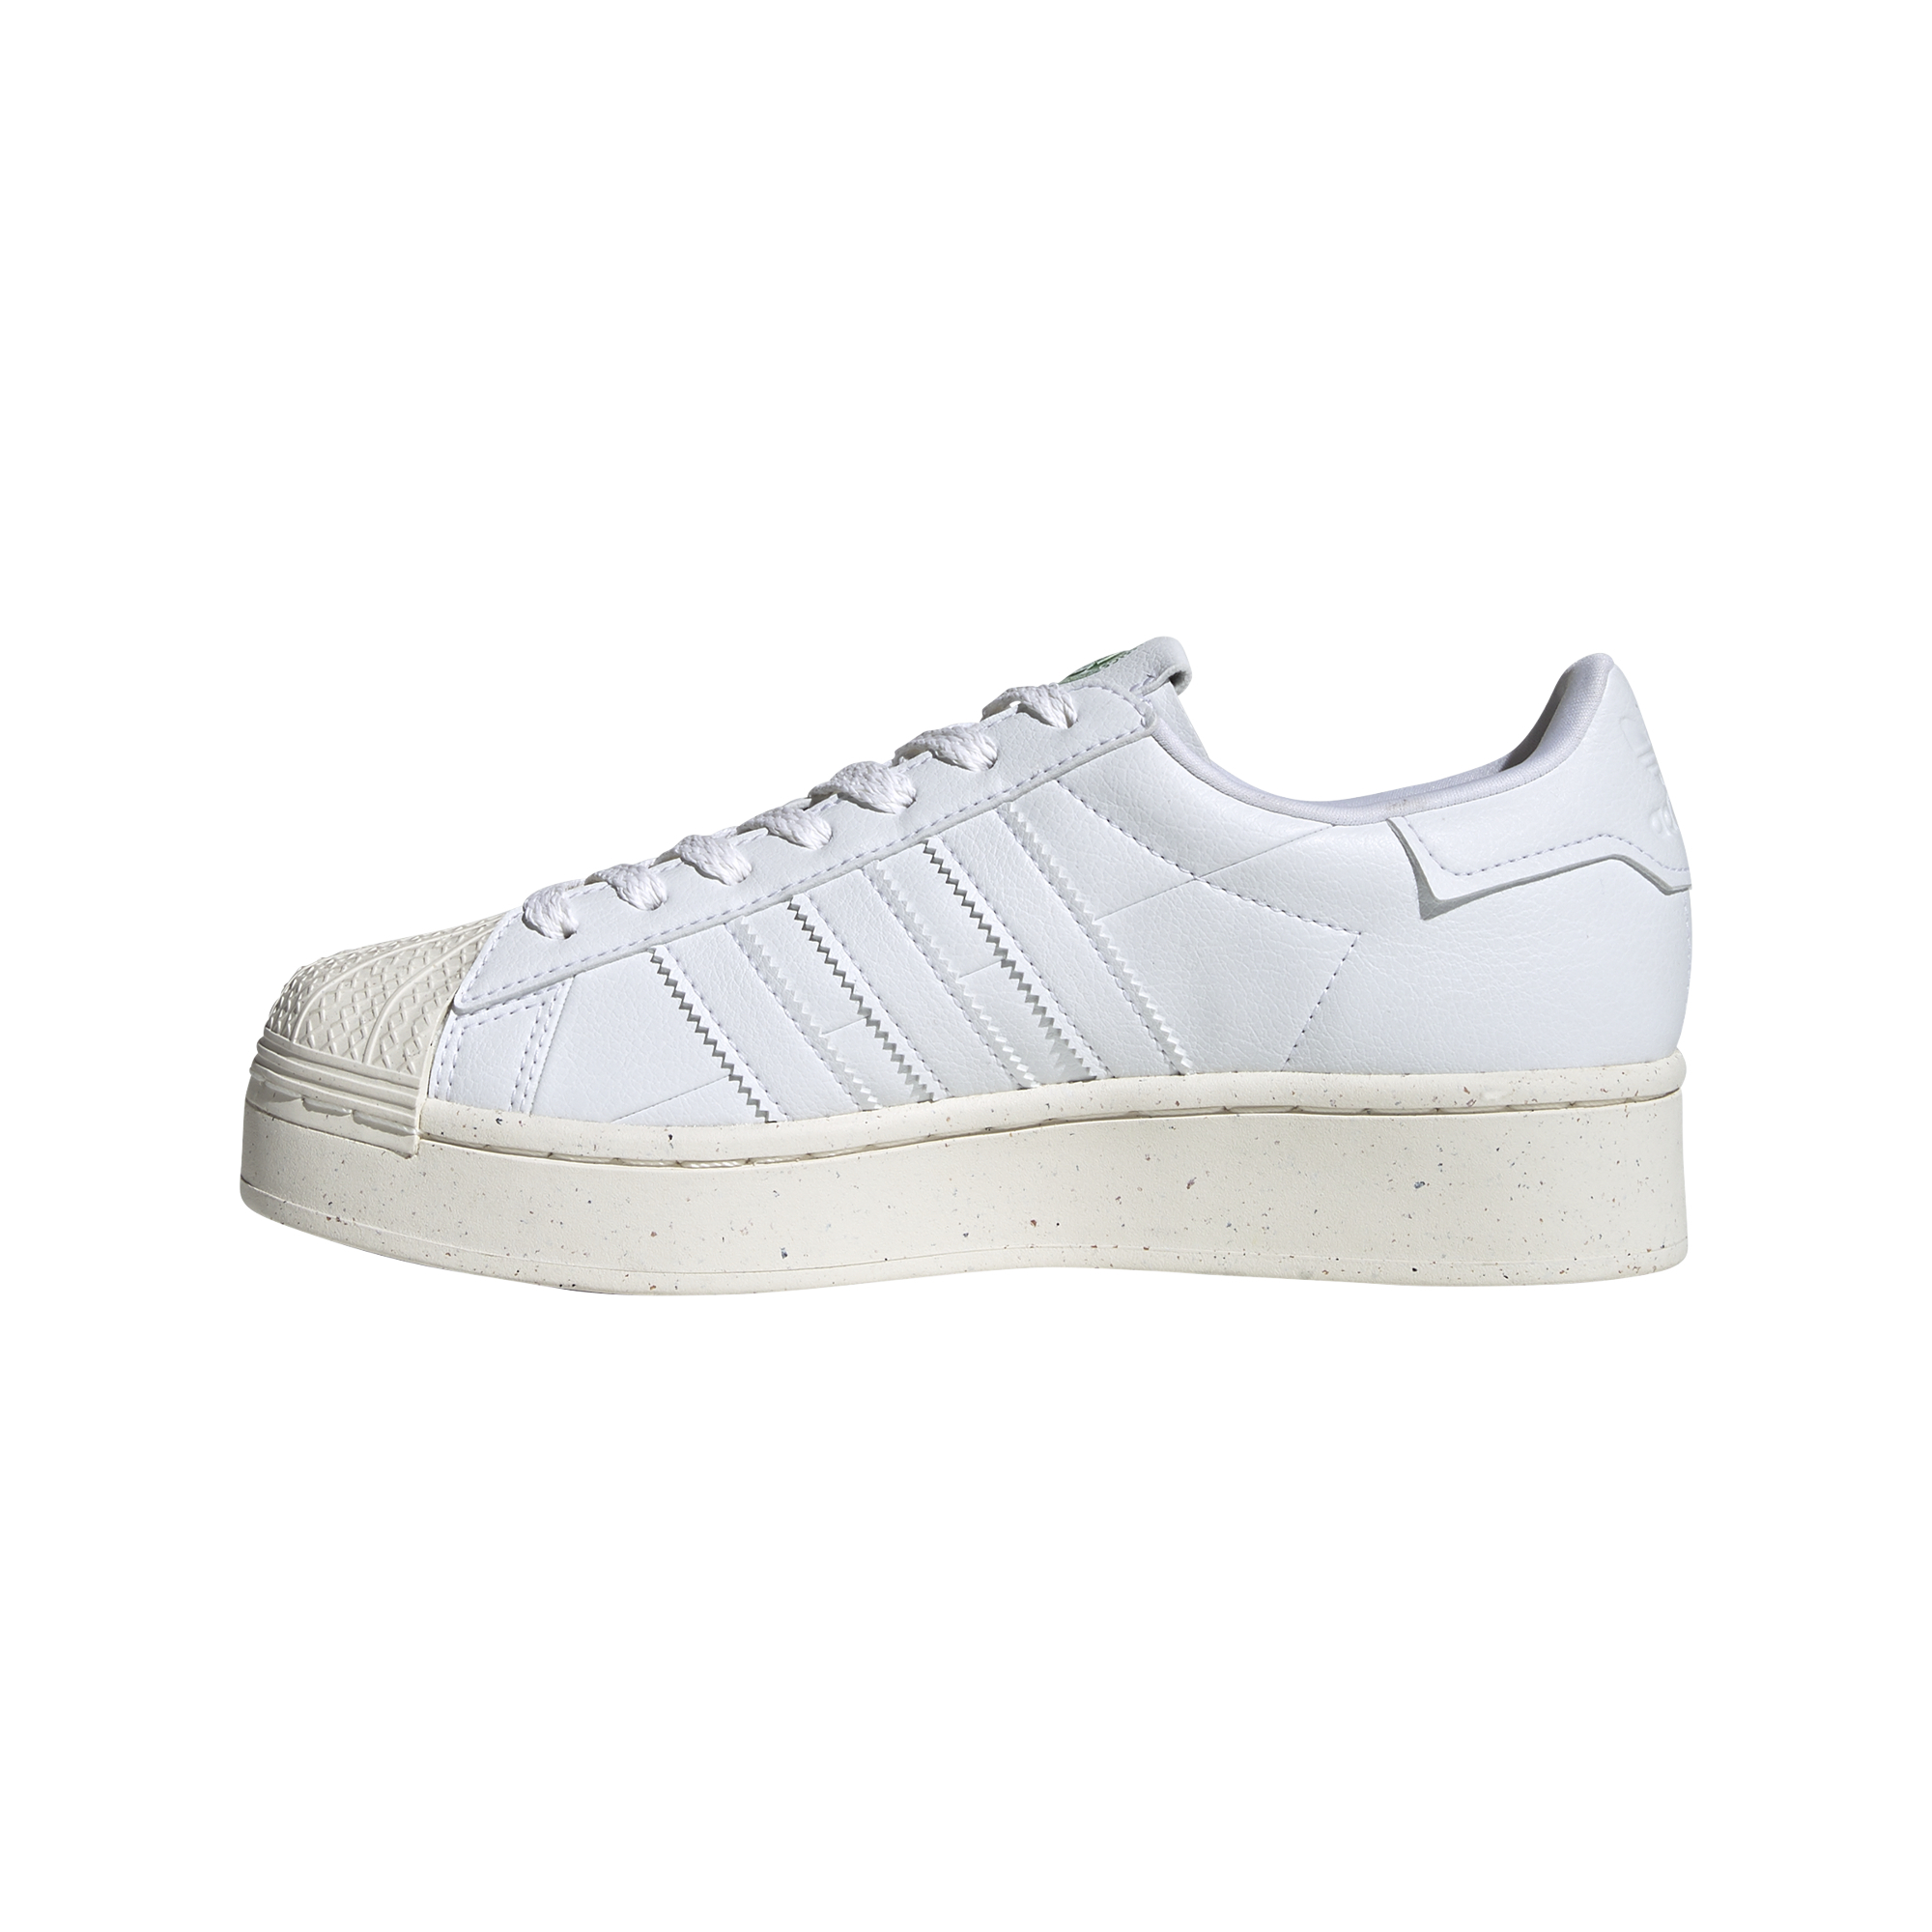 adidas Superstar Bold W Clean Classics Ftw White/ Ftw White/ Off White FY0118